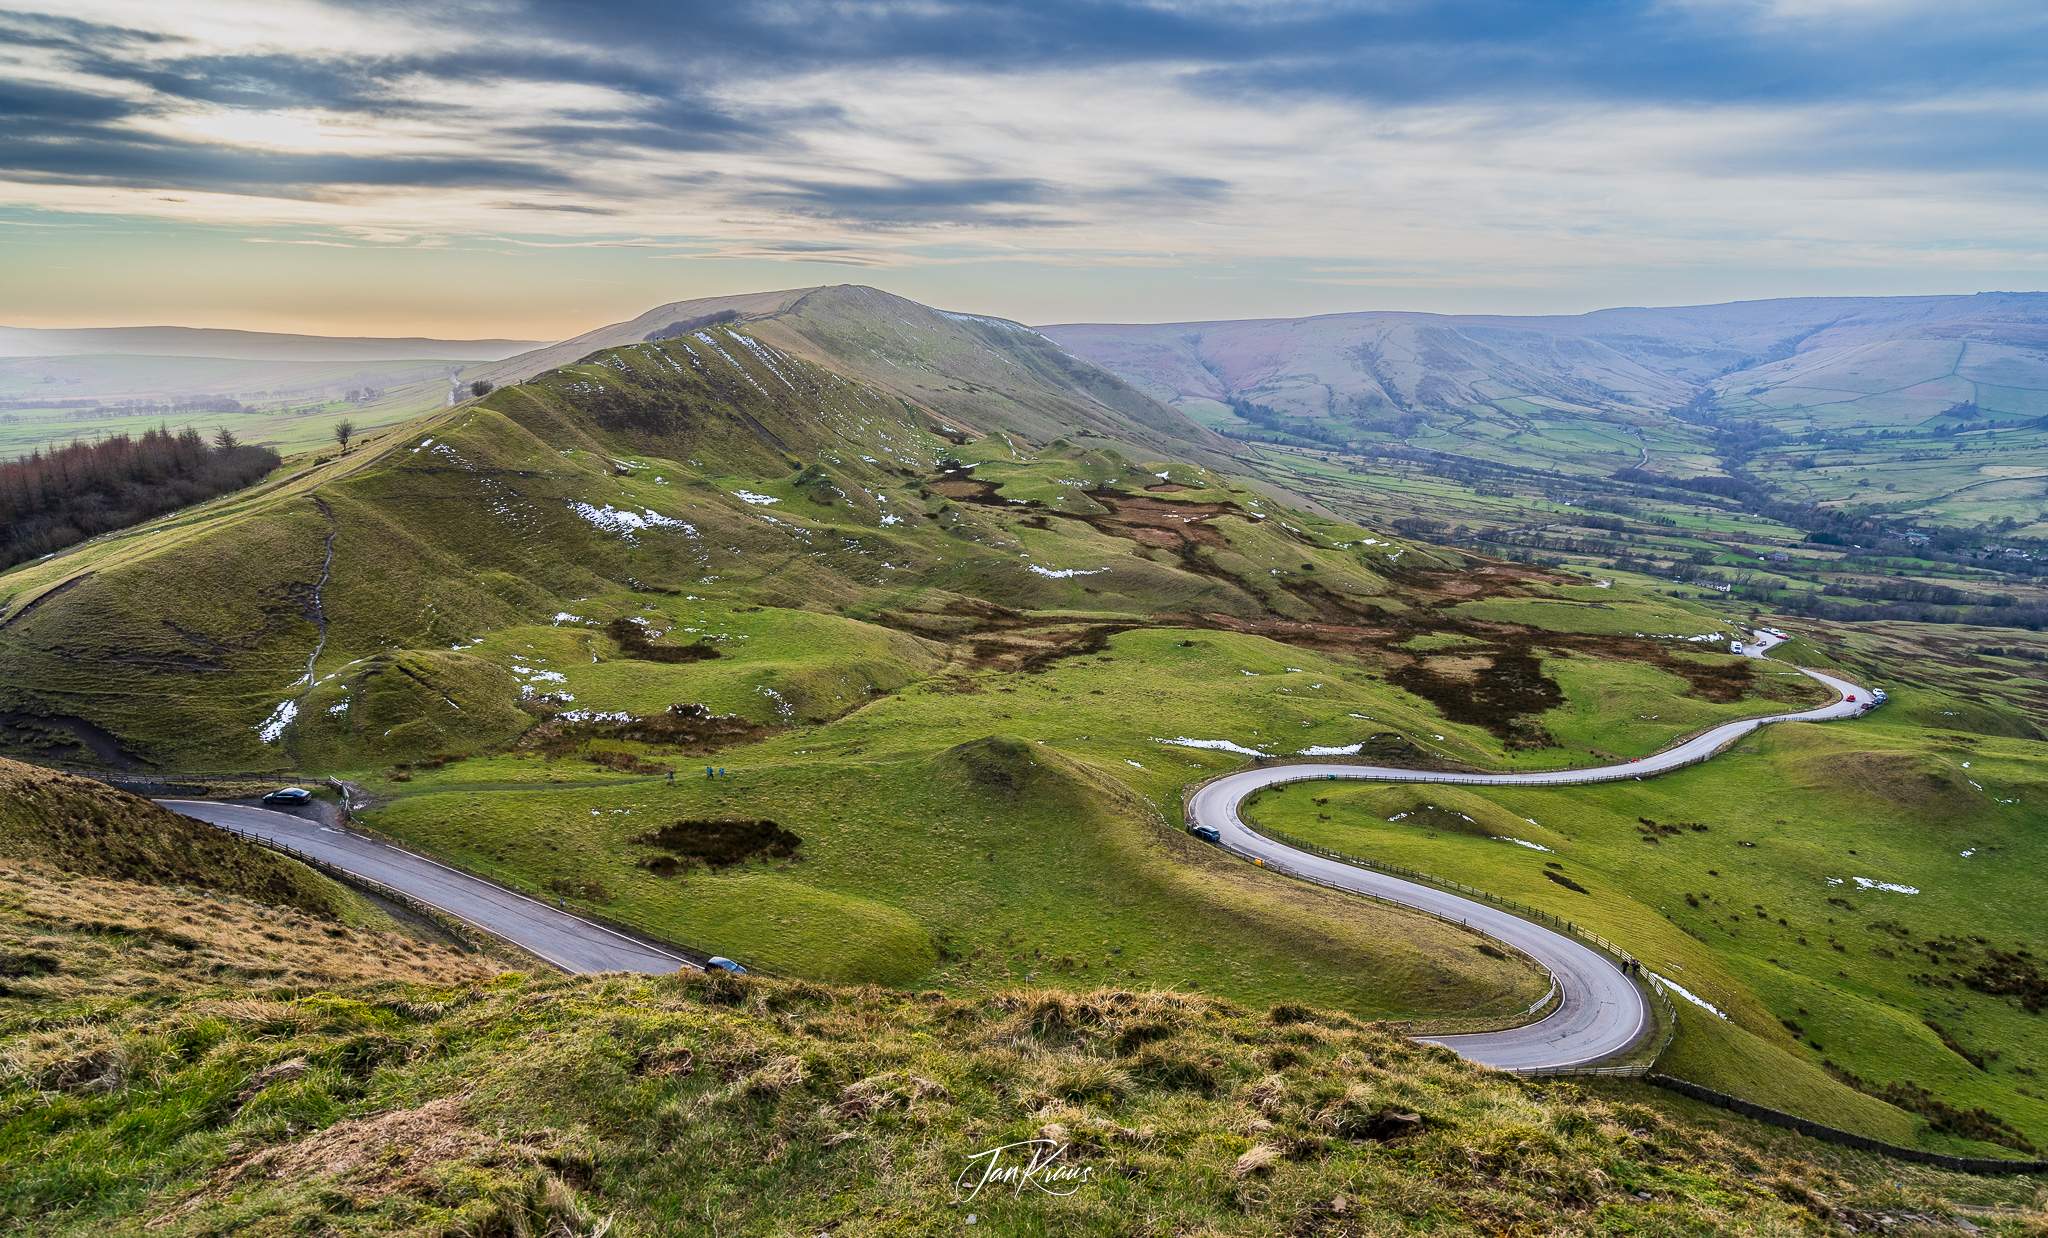 View towards west from slope of Mam Tor, Peak District, England, UK